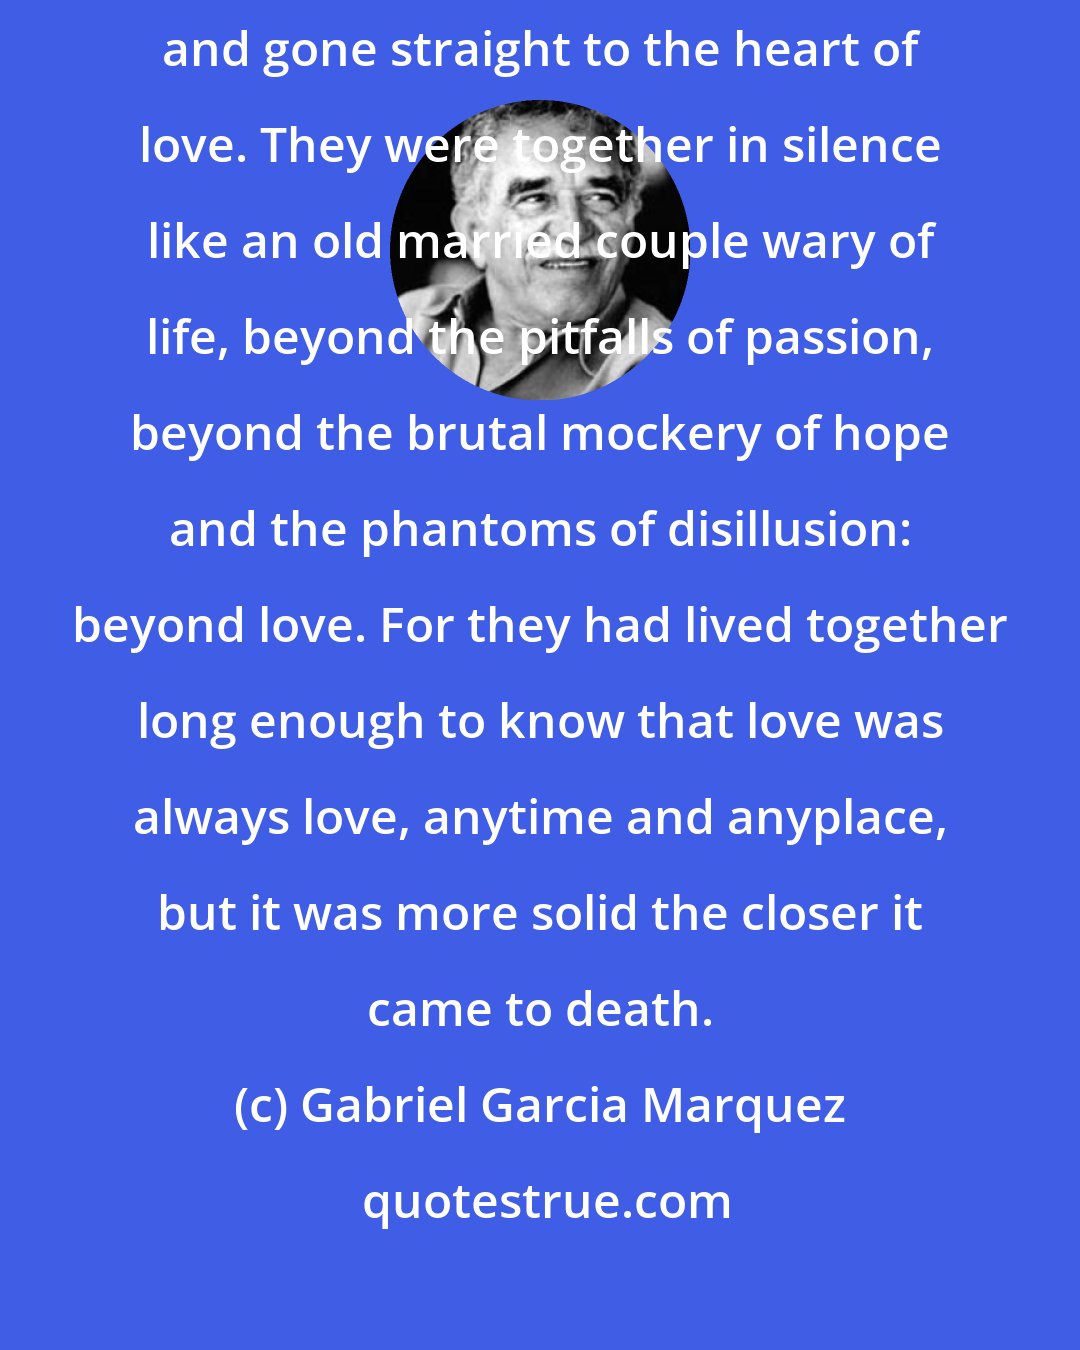 Gabriel Garcia Marquez: It was as if they had leapt over the arduous cavalry of conjugal life and gone straight to the heart of love. They were together in silence like an old married couple wary of life, beyond the pitfalls of passion, beyond the brutal mockery of hope and the phantoms of disillusion: beyond love. For they had lived together long enough to know that love was always love, anytime and anyplace, but it was more solid the closer it came to death.